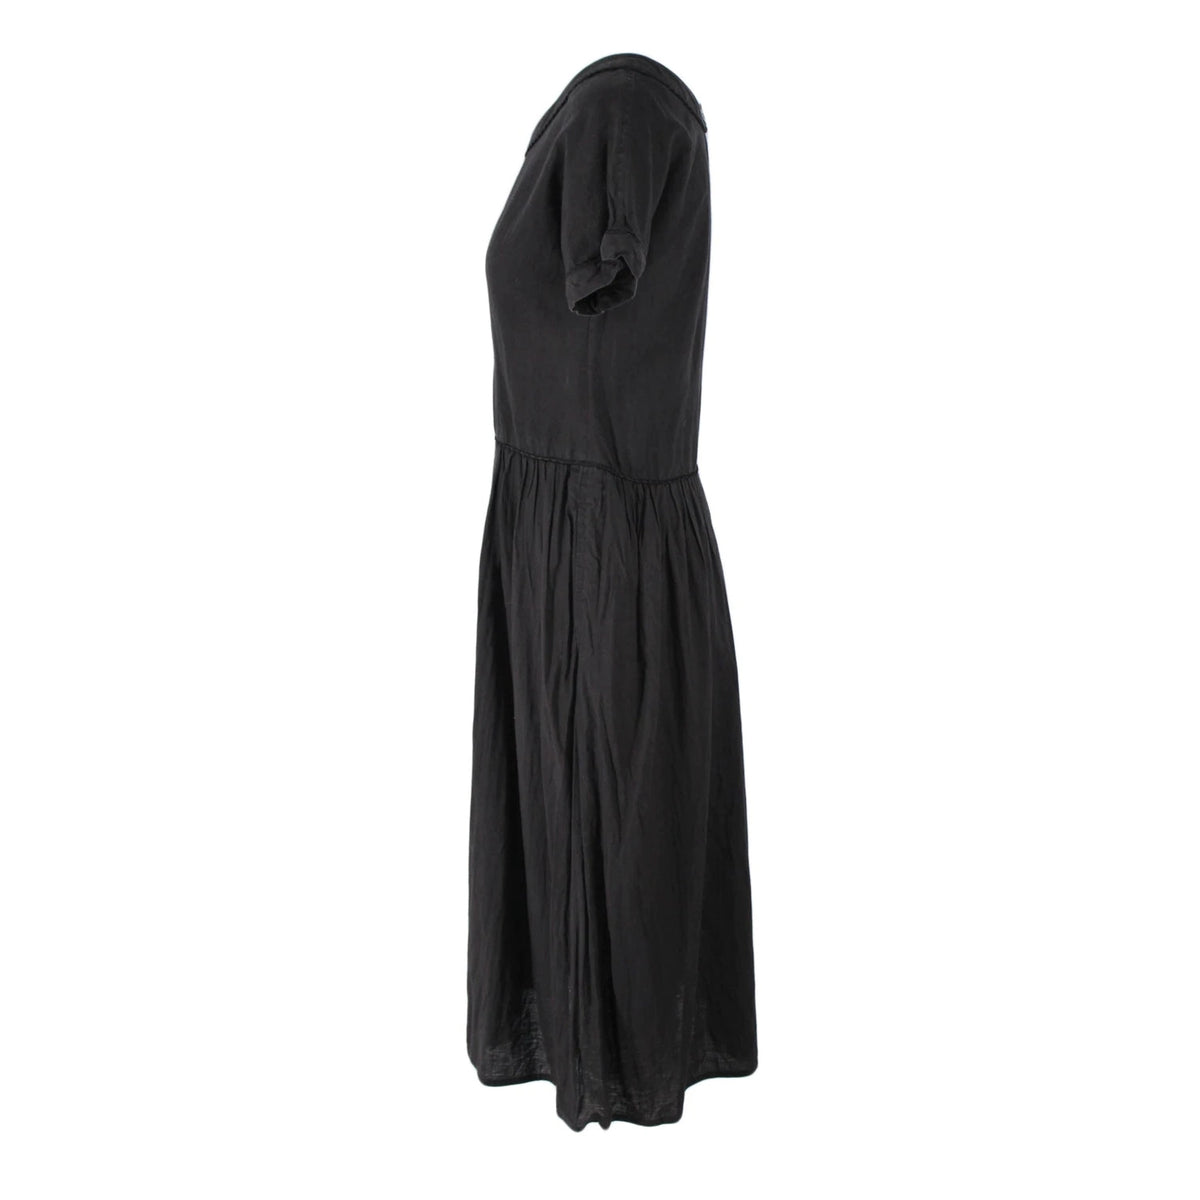 Pre-Owned SAKS FIFTH AVENUE Vintage Black Dress |  Size 6 - M/L - theREMODA